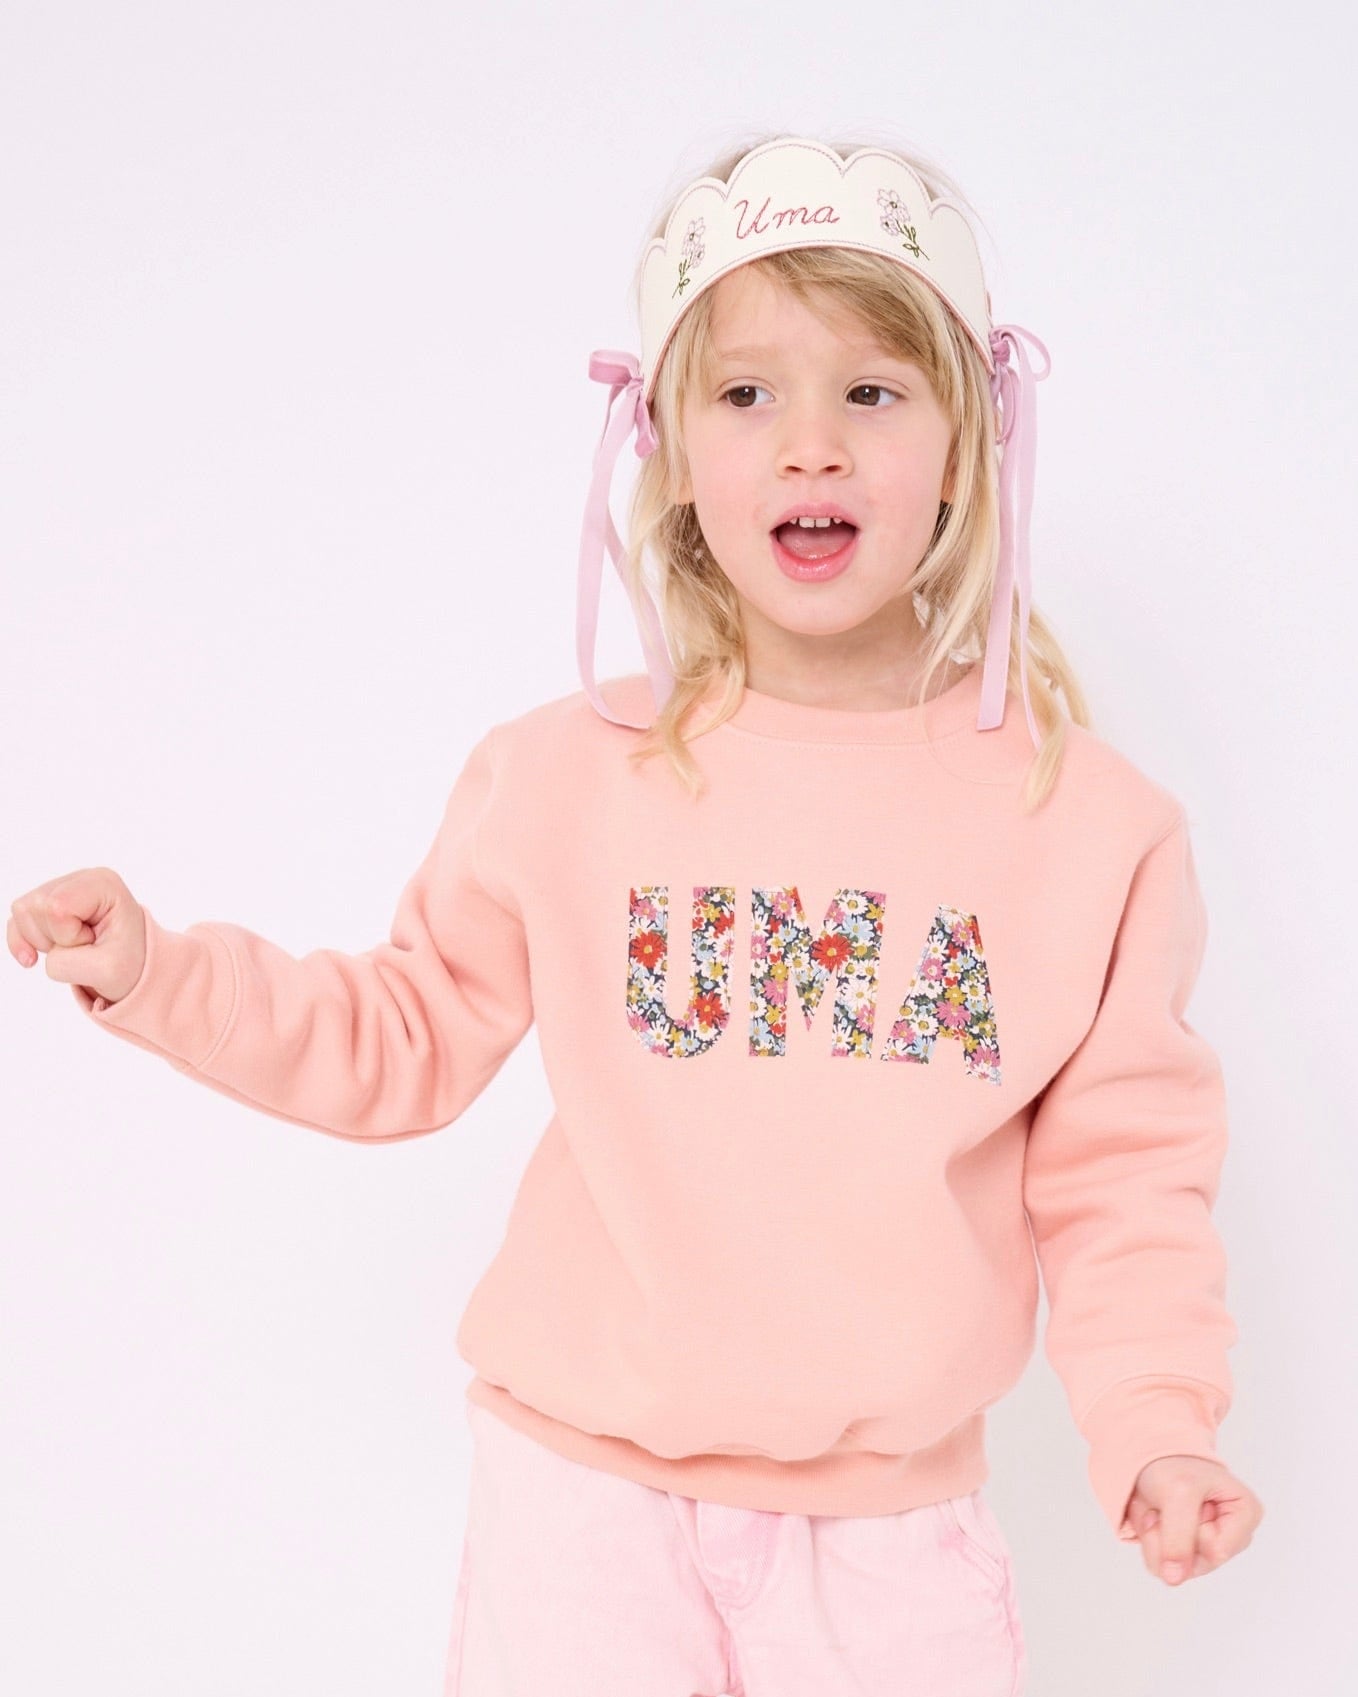 Magnificent Stanley sweatshirt Dusty Pink Name Sweatshirt in Choice of Liberty Print